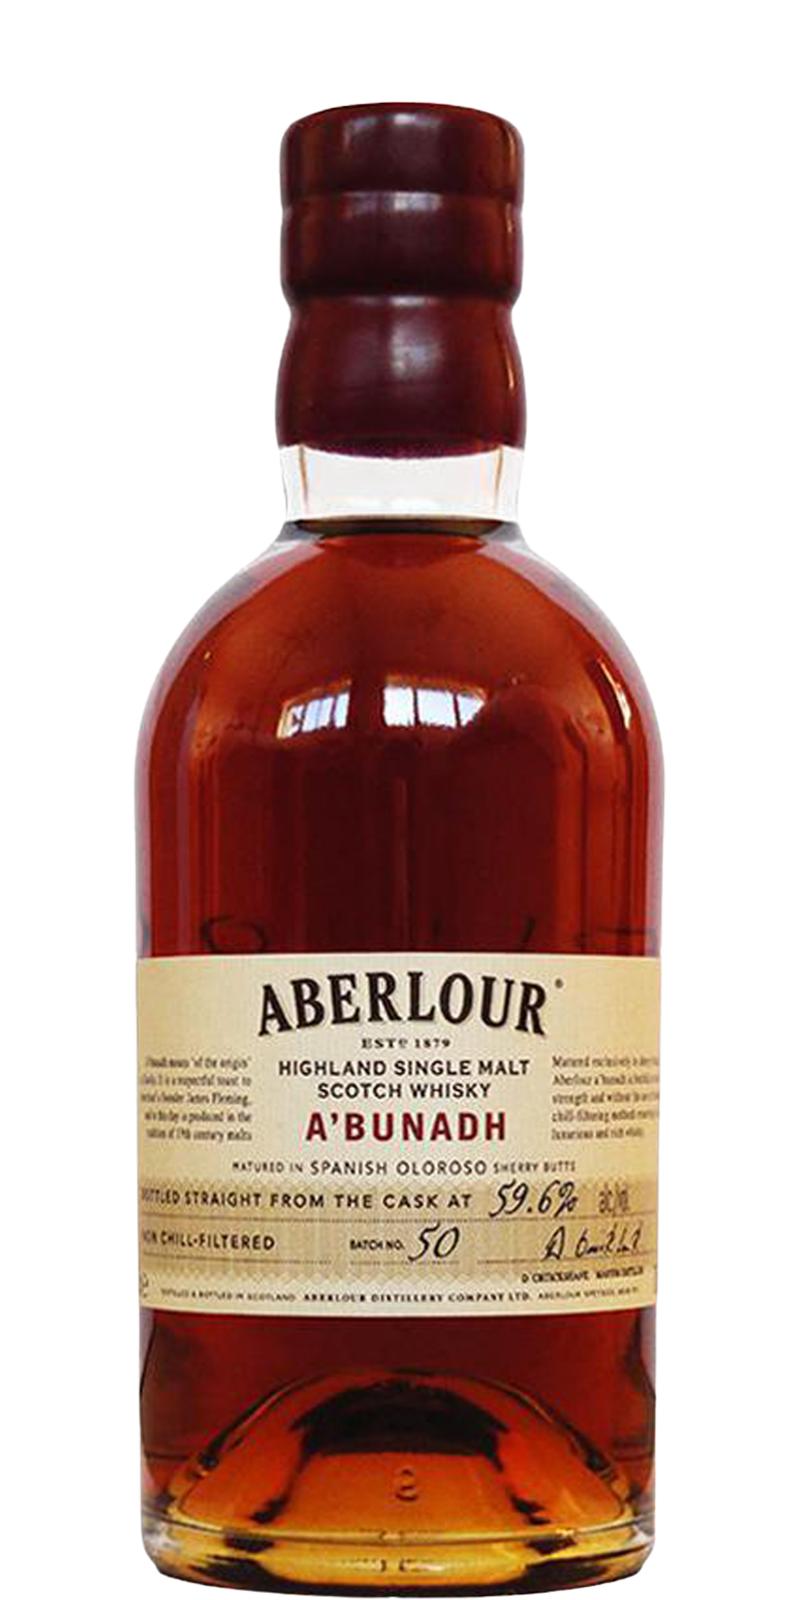 Aberlour A'bunadh batch #50 - Ratings and reviews - Whiskybase